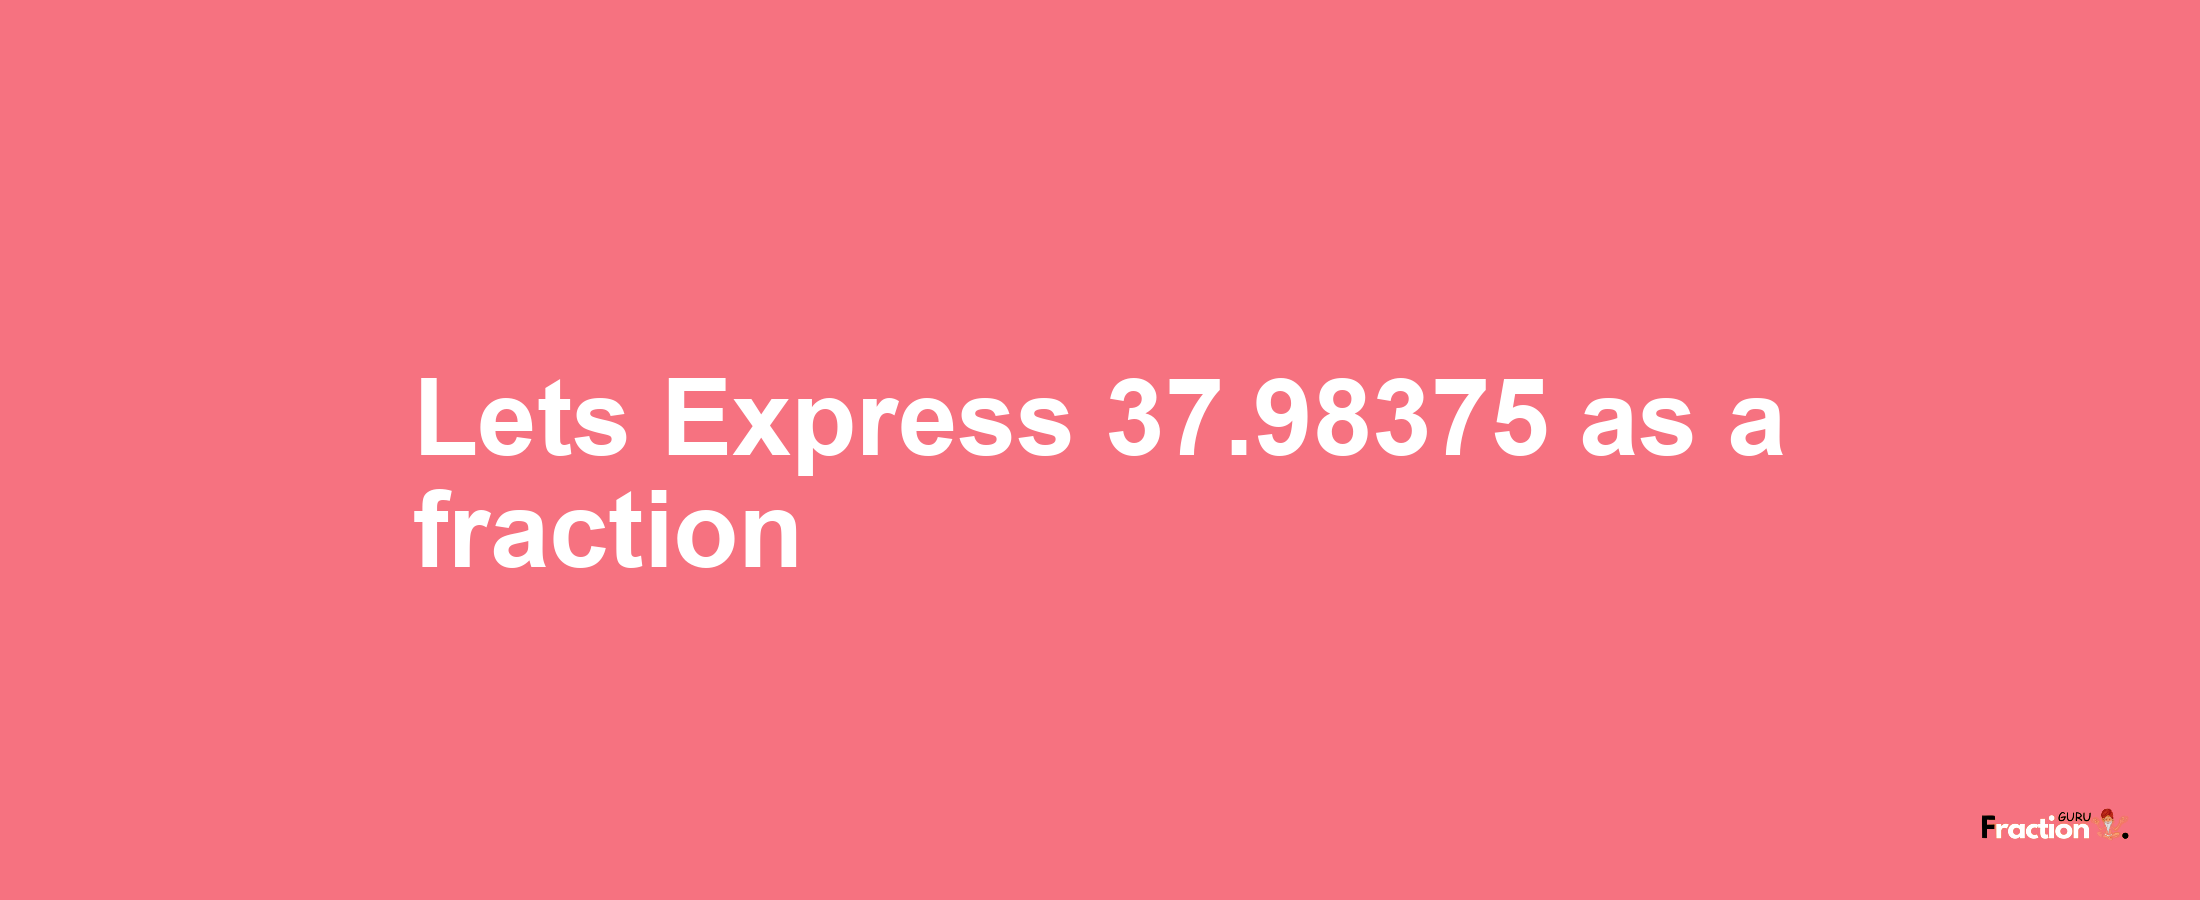 Lets Express 37.98375 as afraction